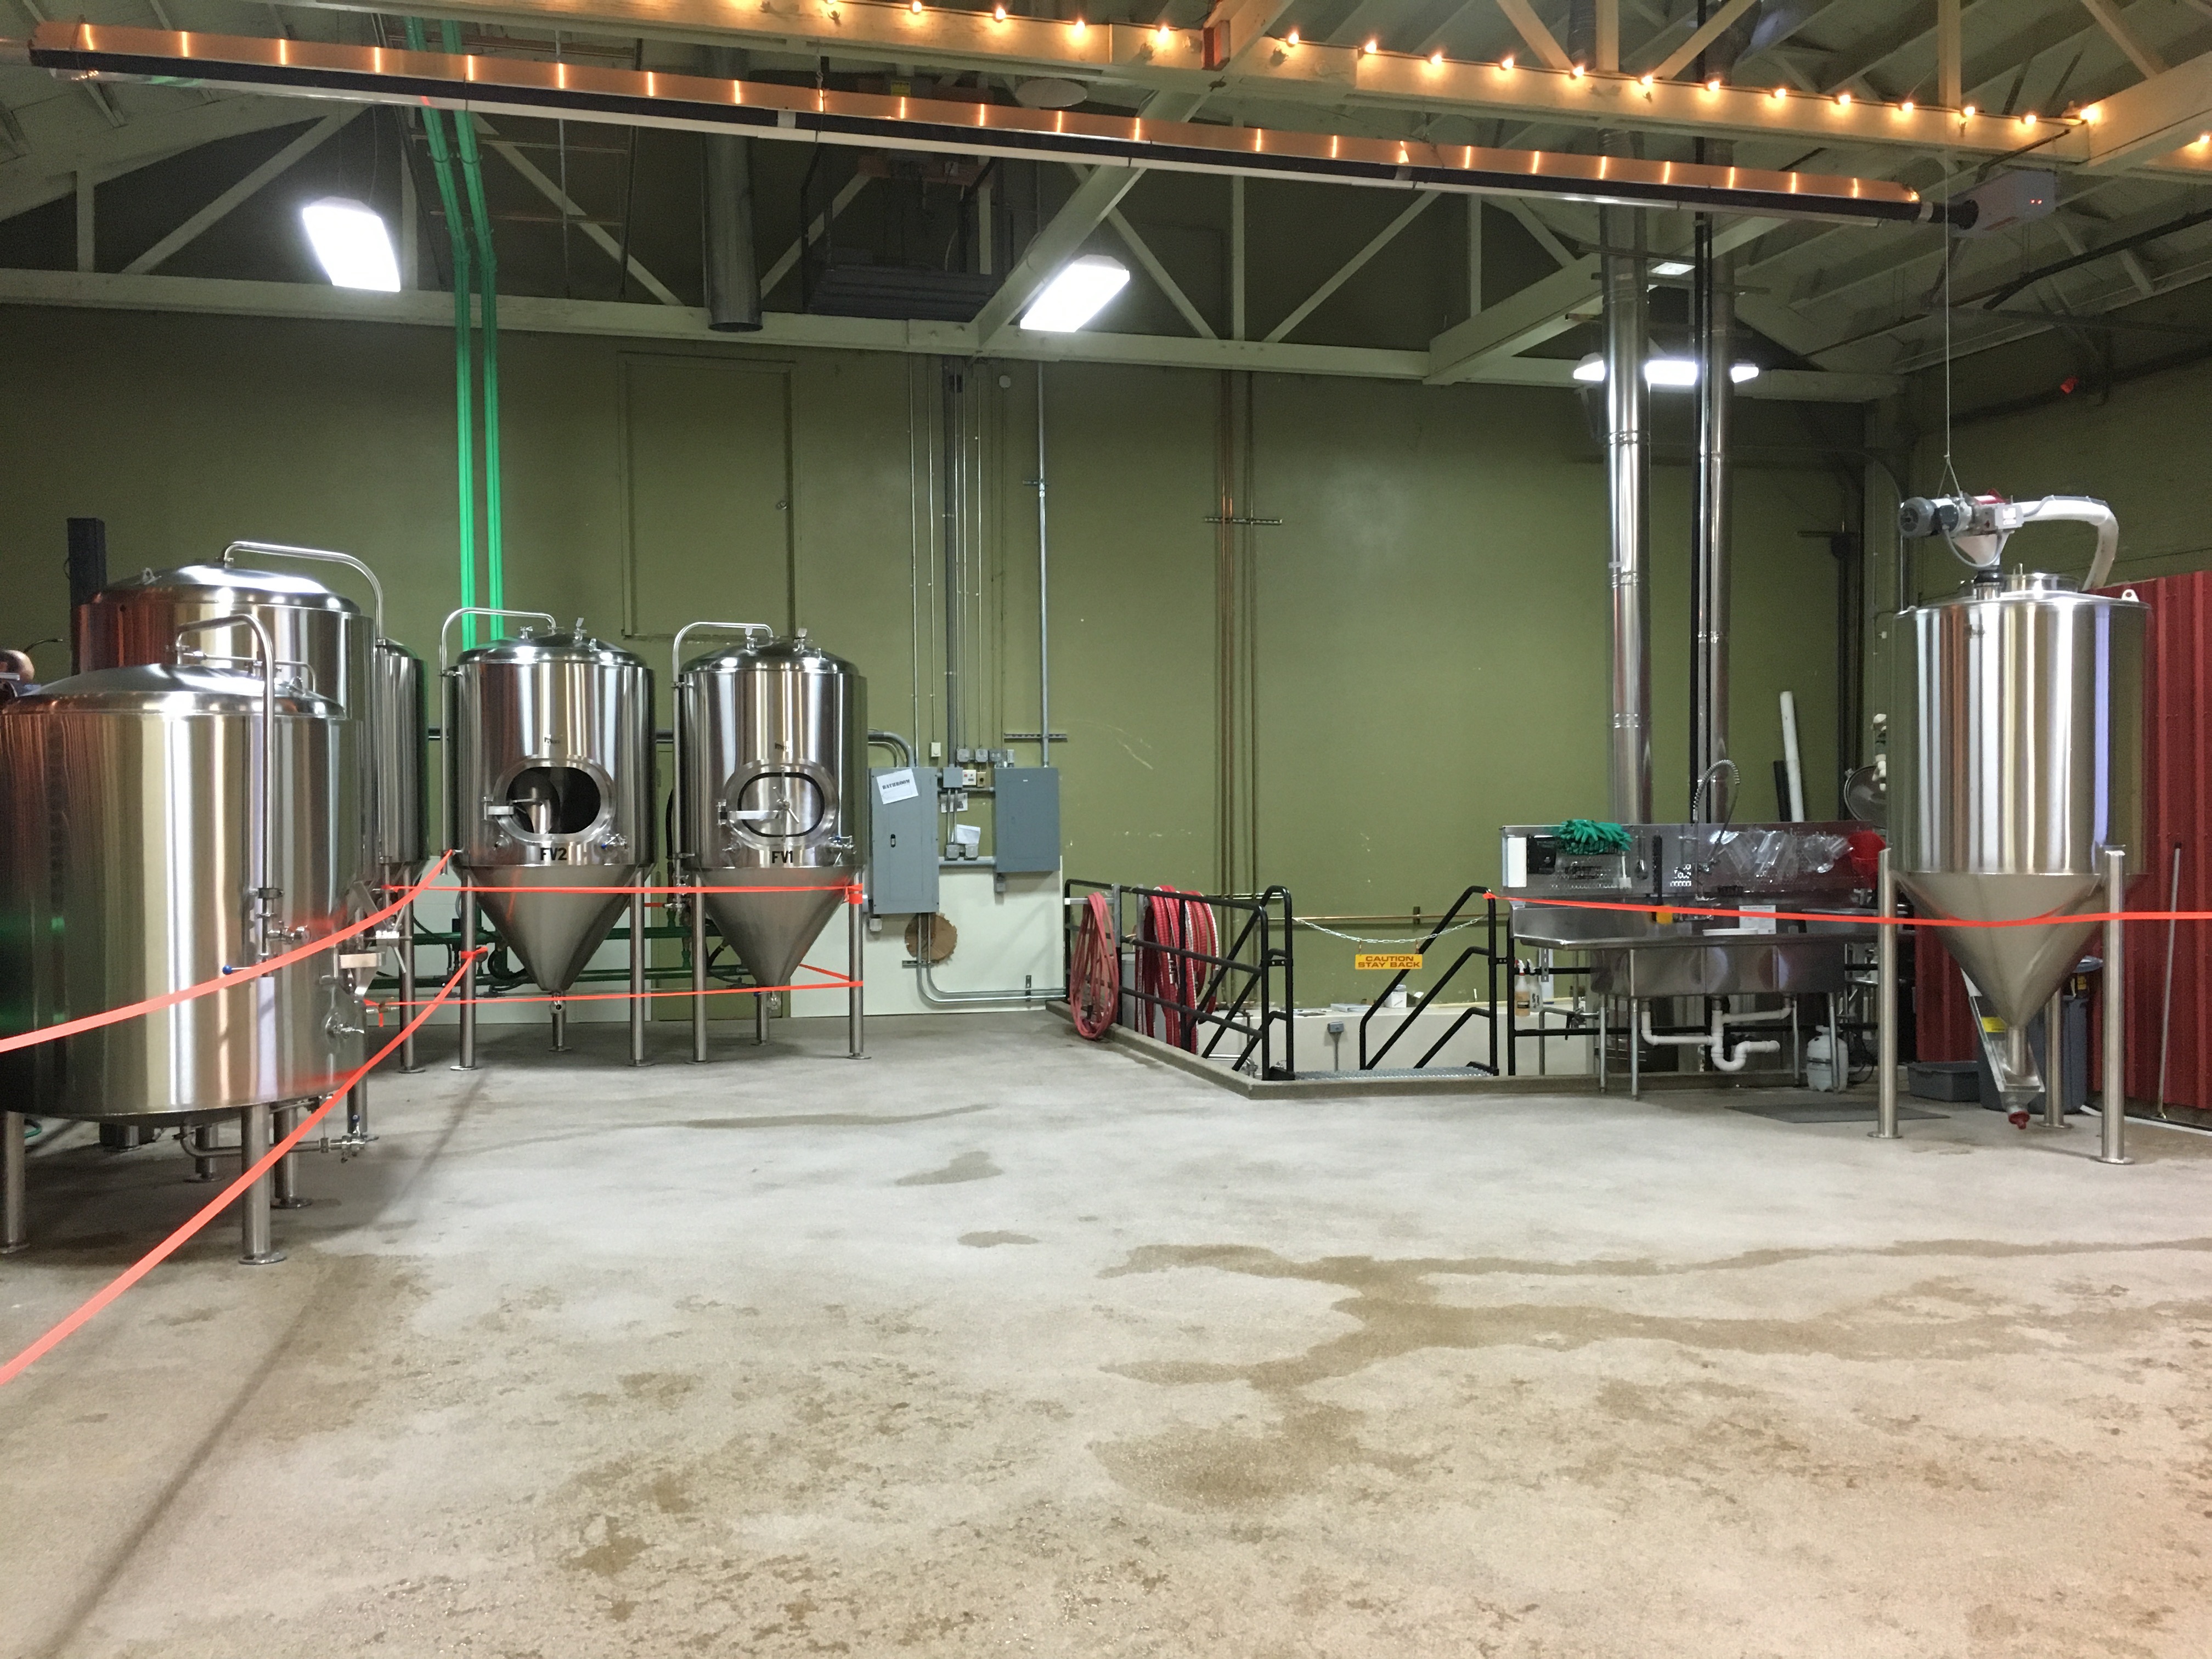 Inside the brewery at Freebridge Brewing.